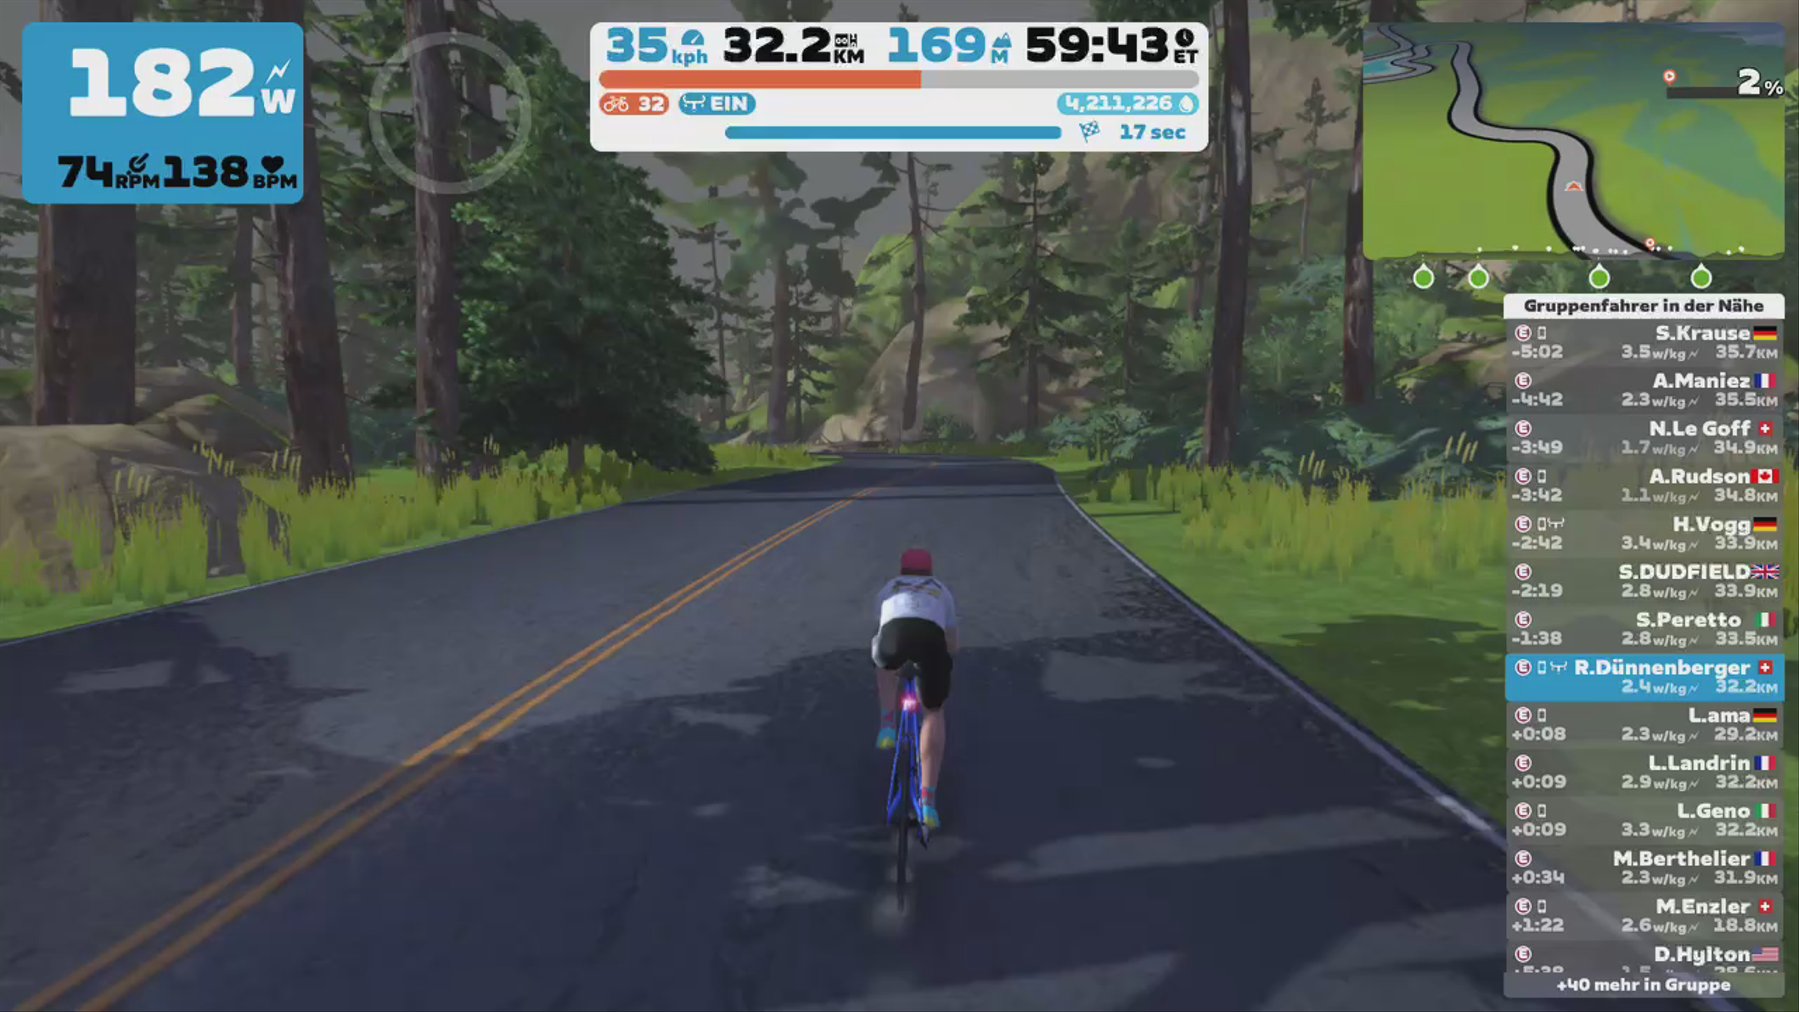 Zwift - Group Ride: Velocio Better Together Rides (E) on Coast Crusher in Watopia